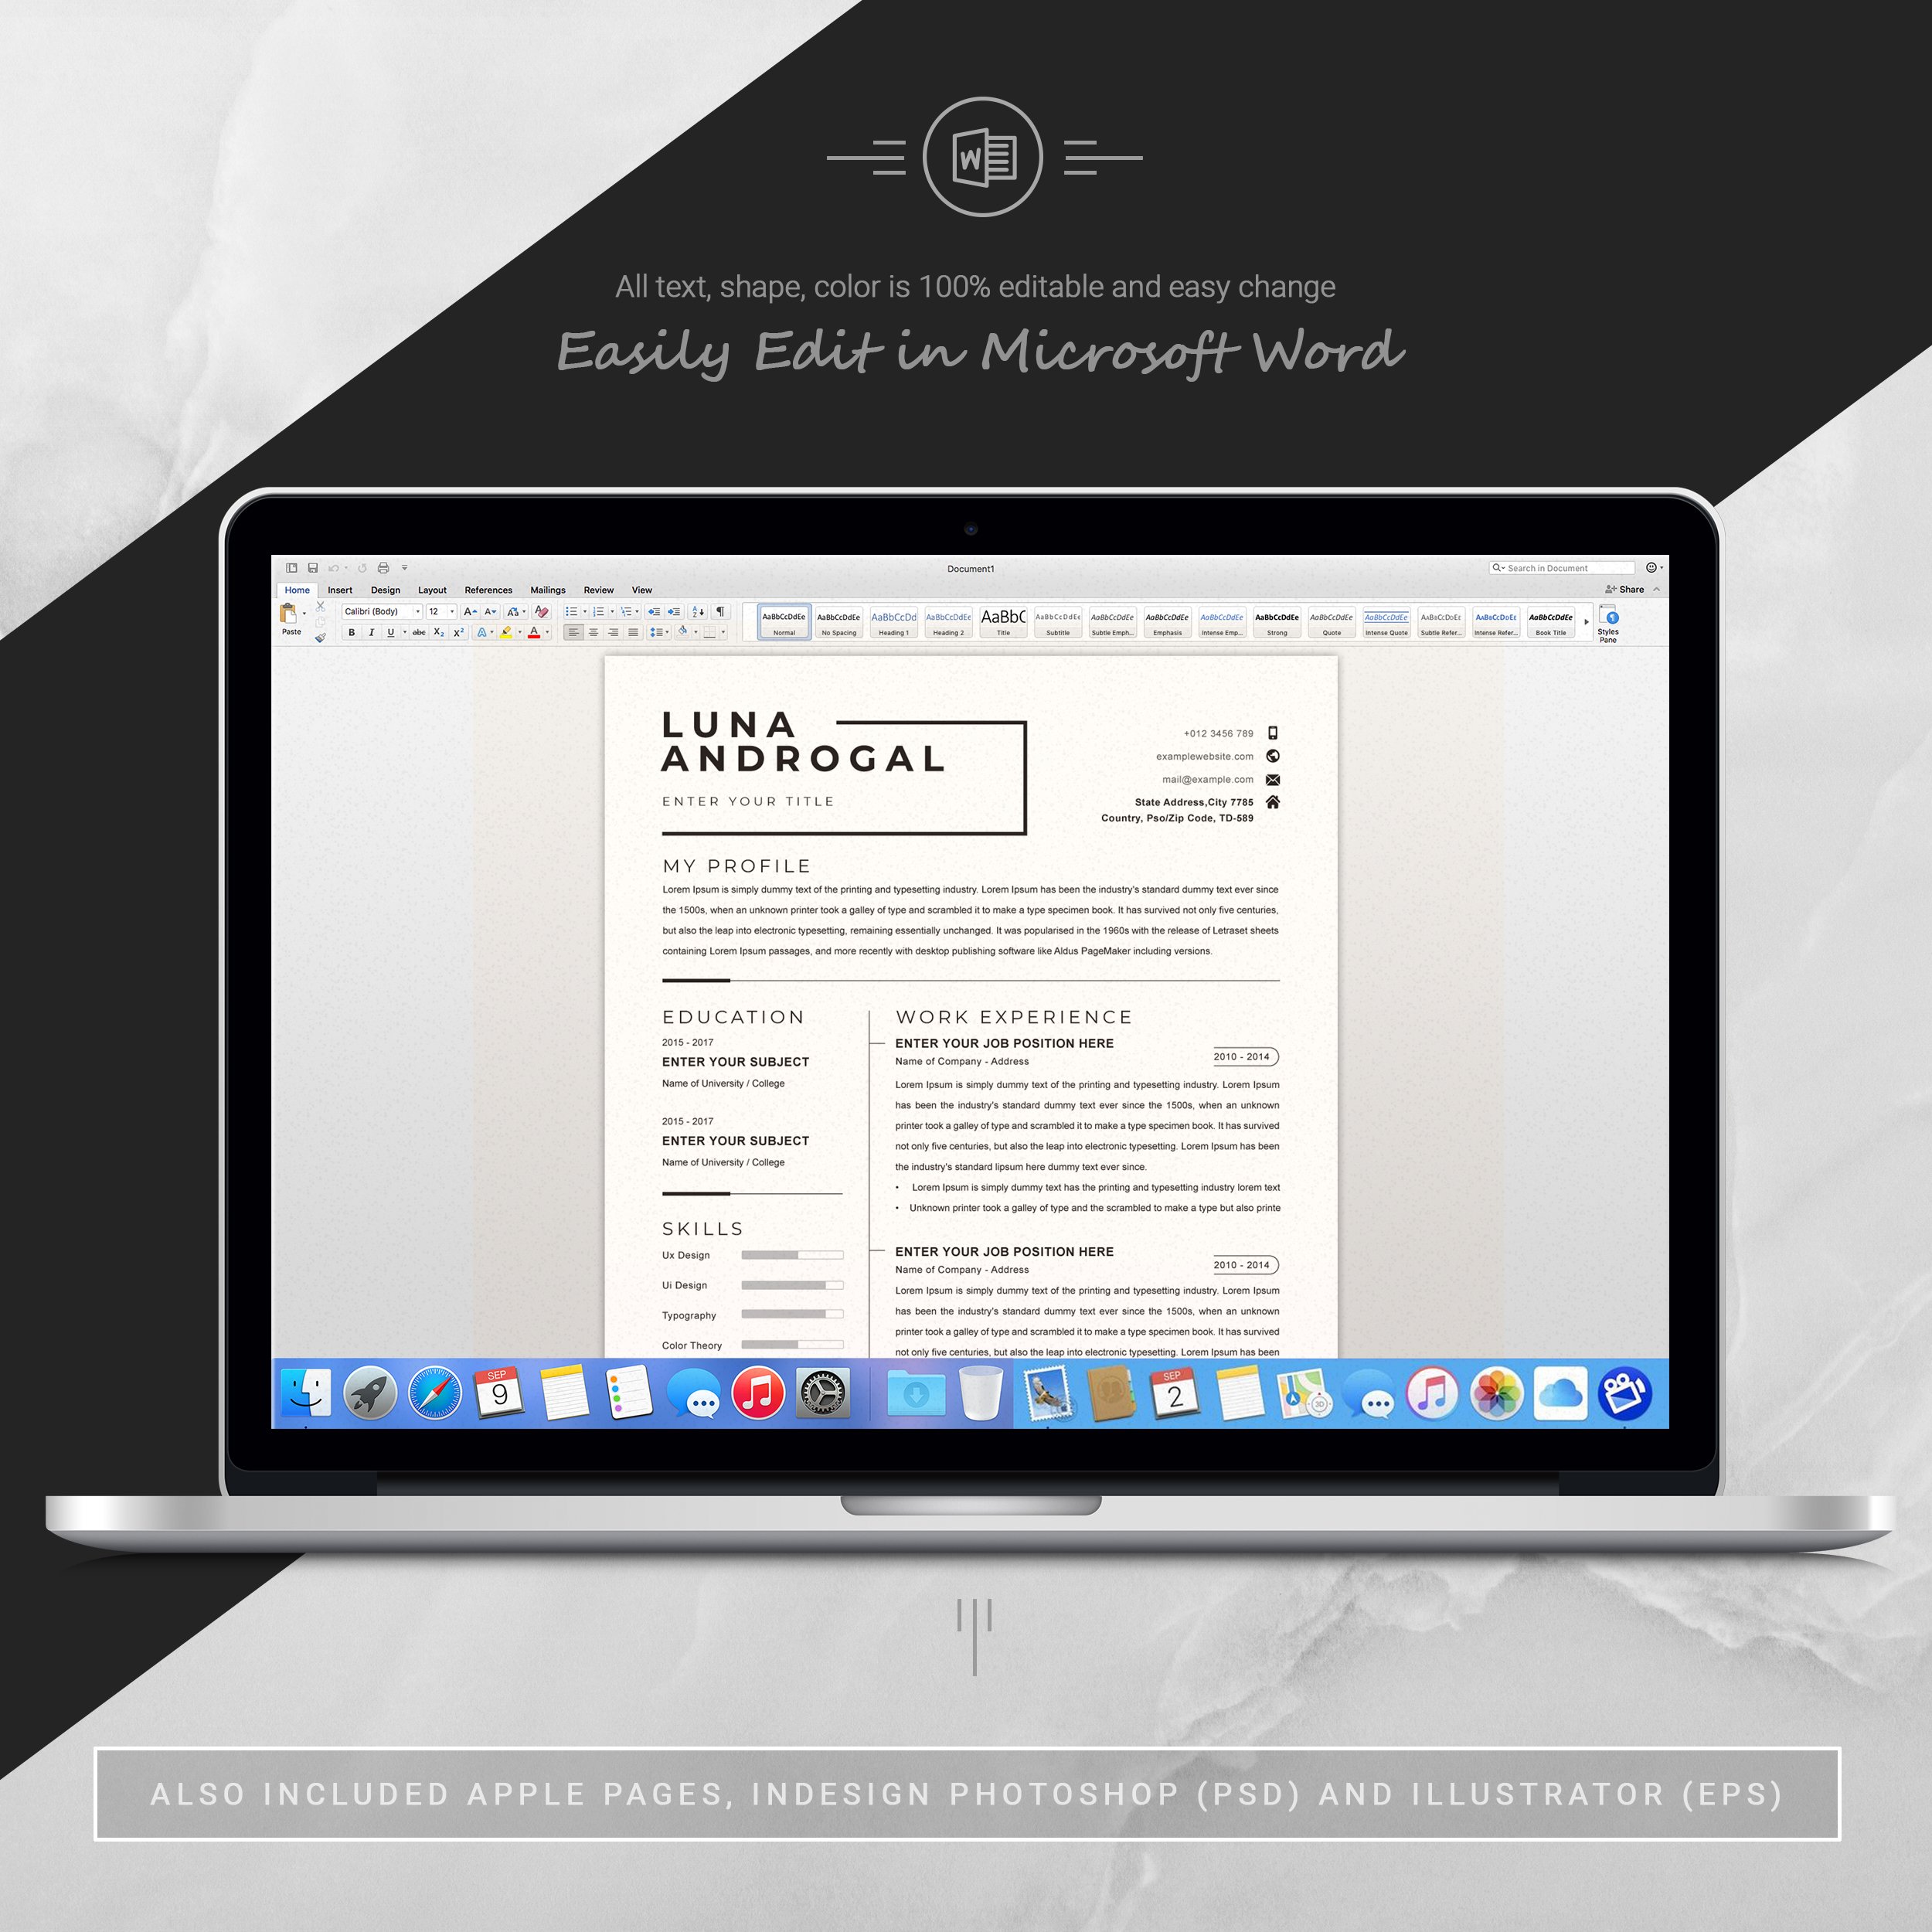 06 3 pages free resume ms word file format design template 253